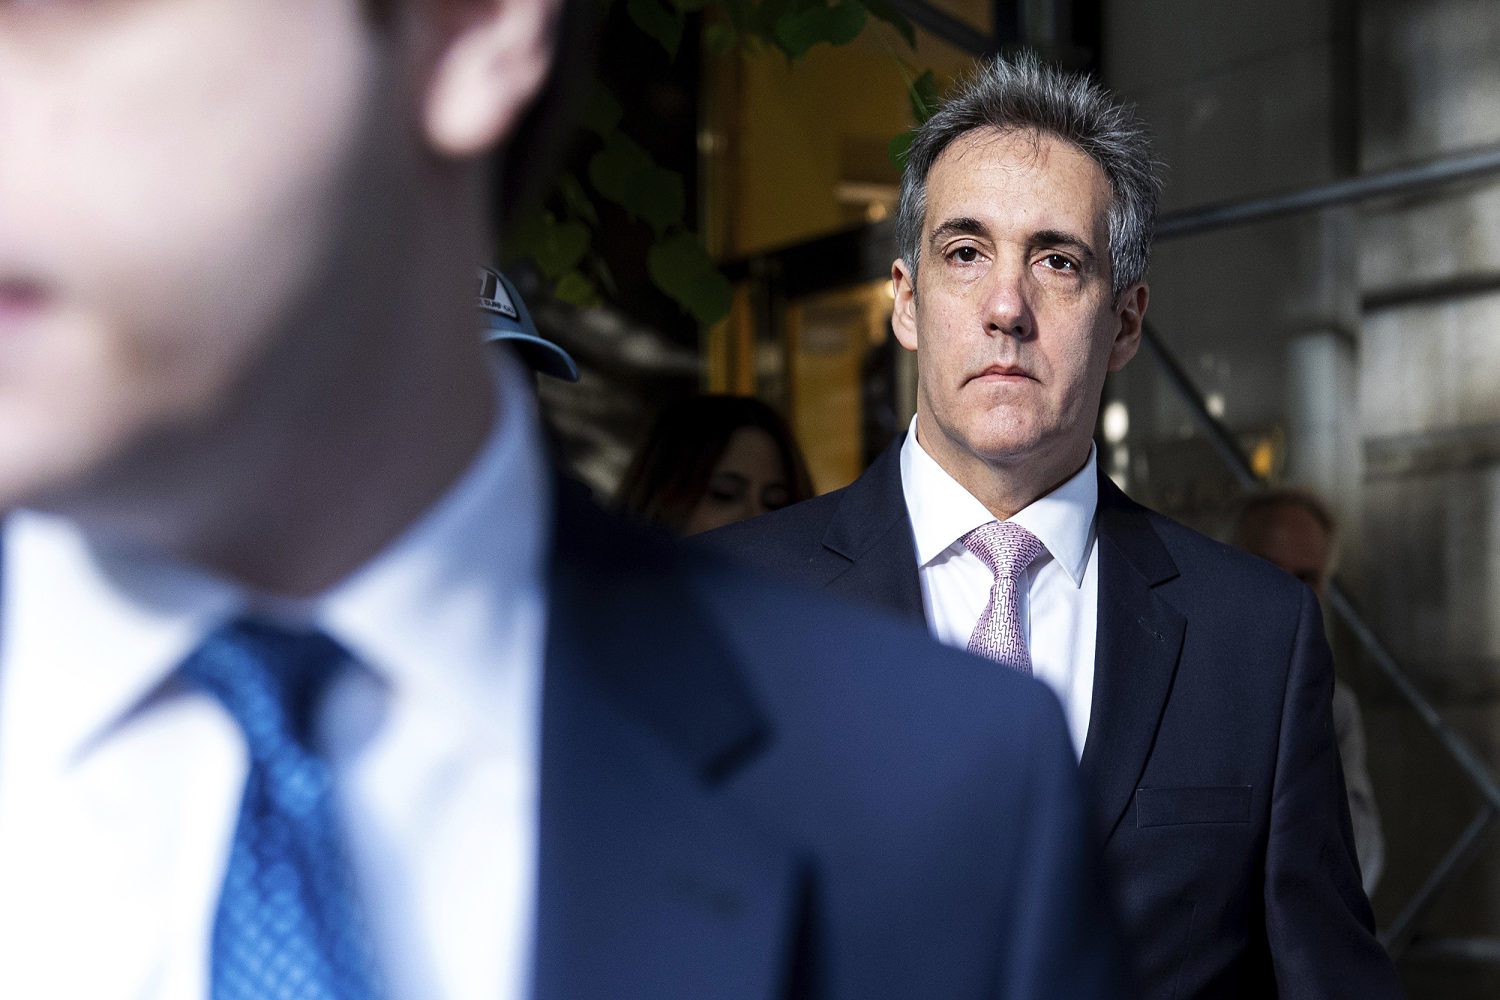 Michael Cohen testifies about working with National Enquirer to help Trump